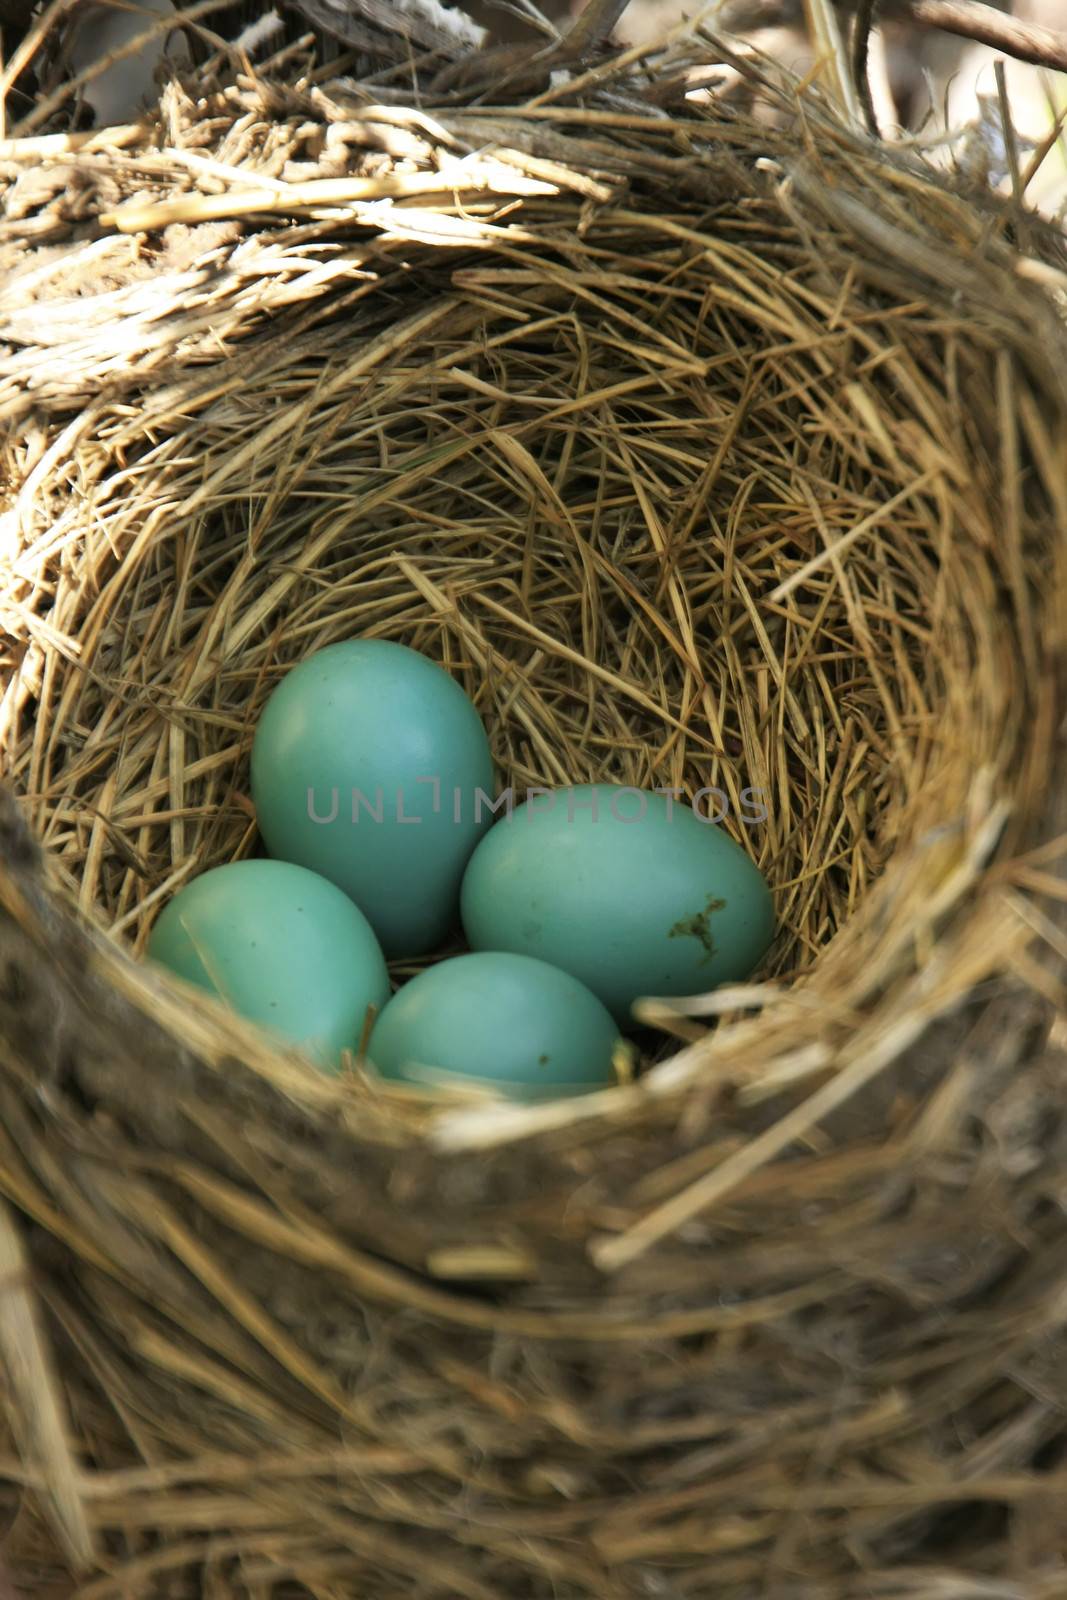 American Robin nest with eggs by donya_nedomam